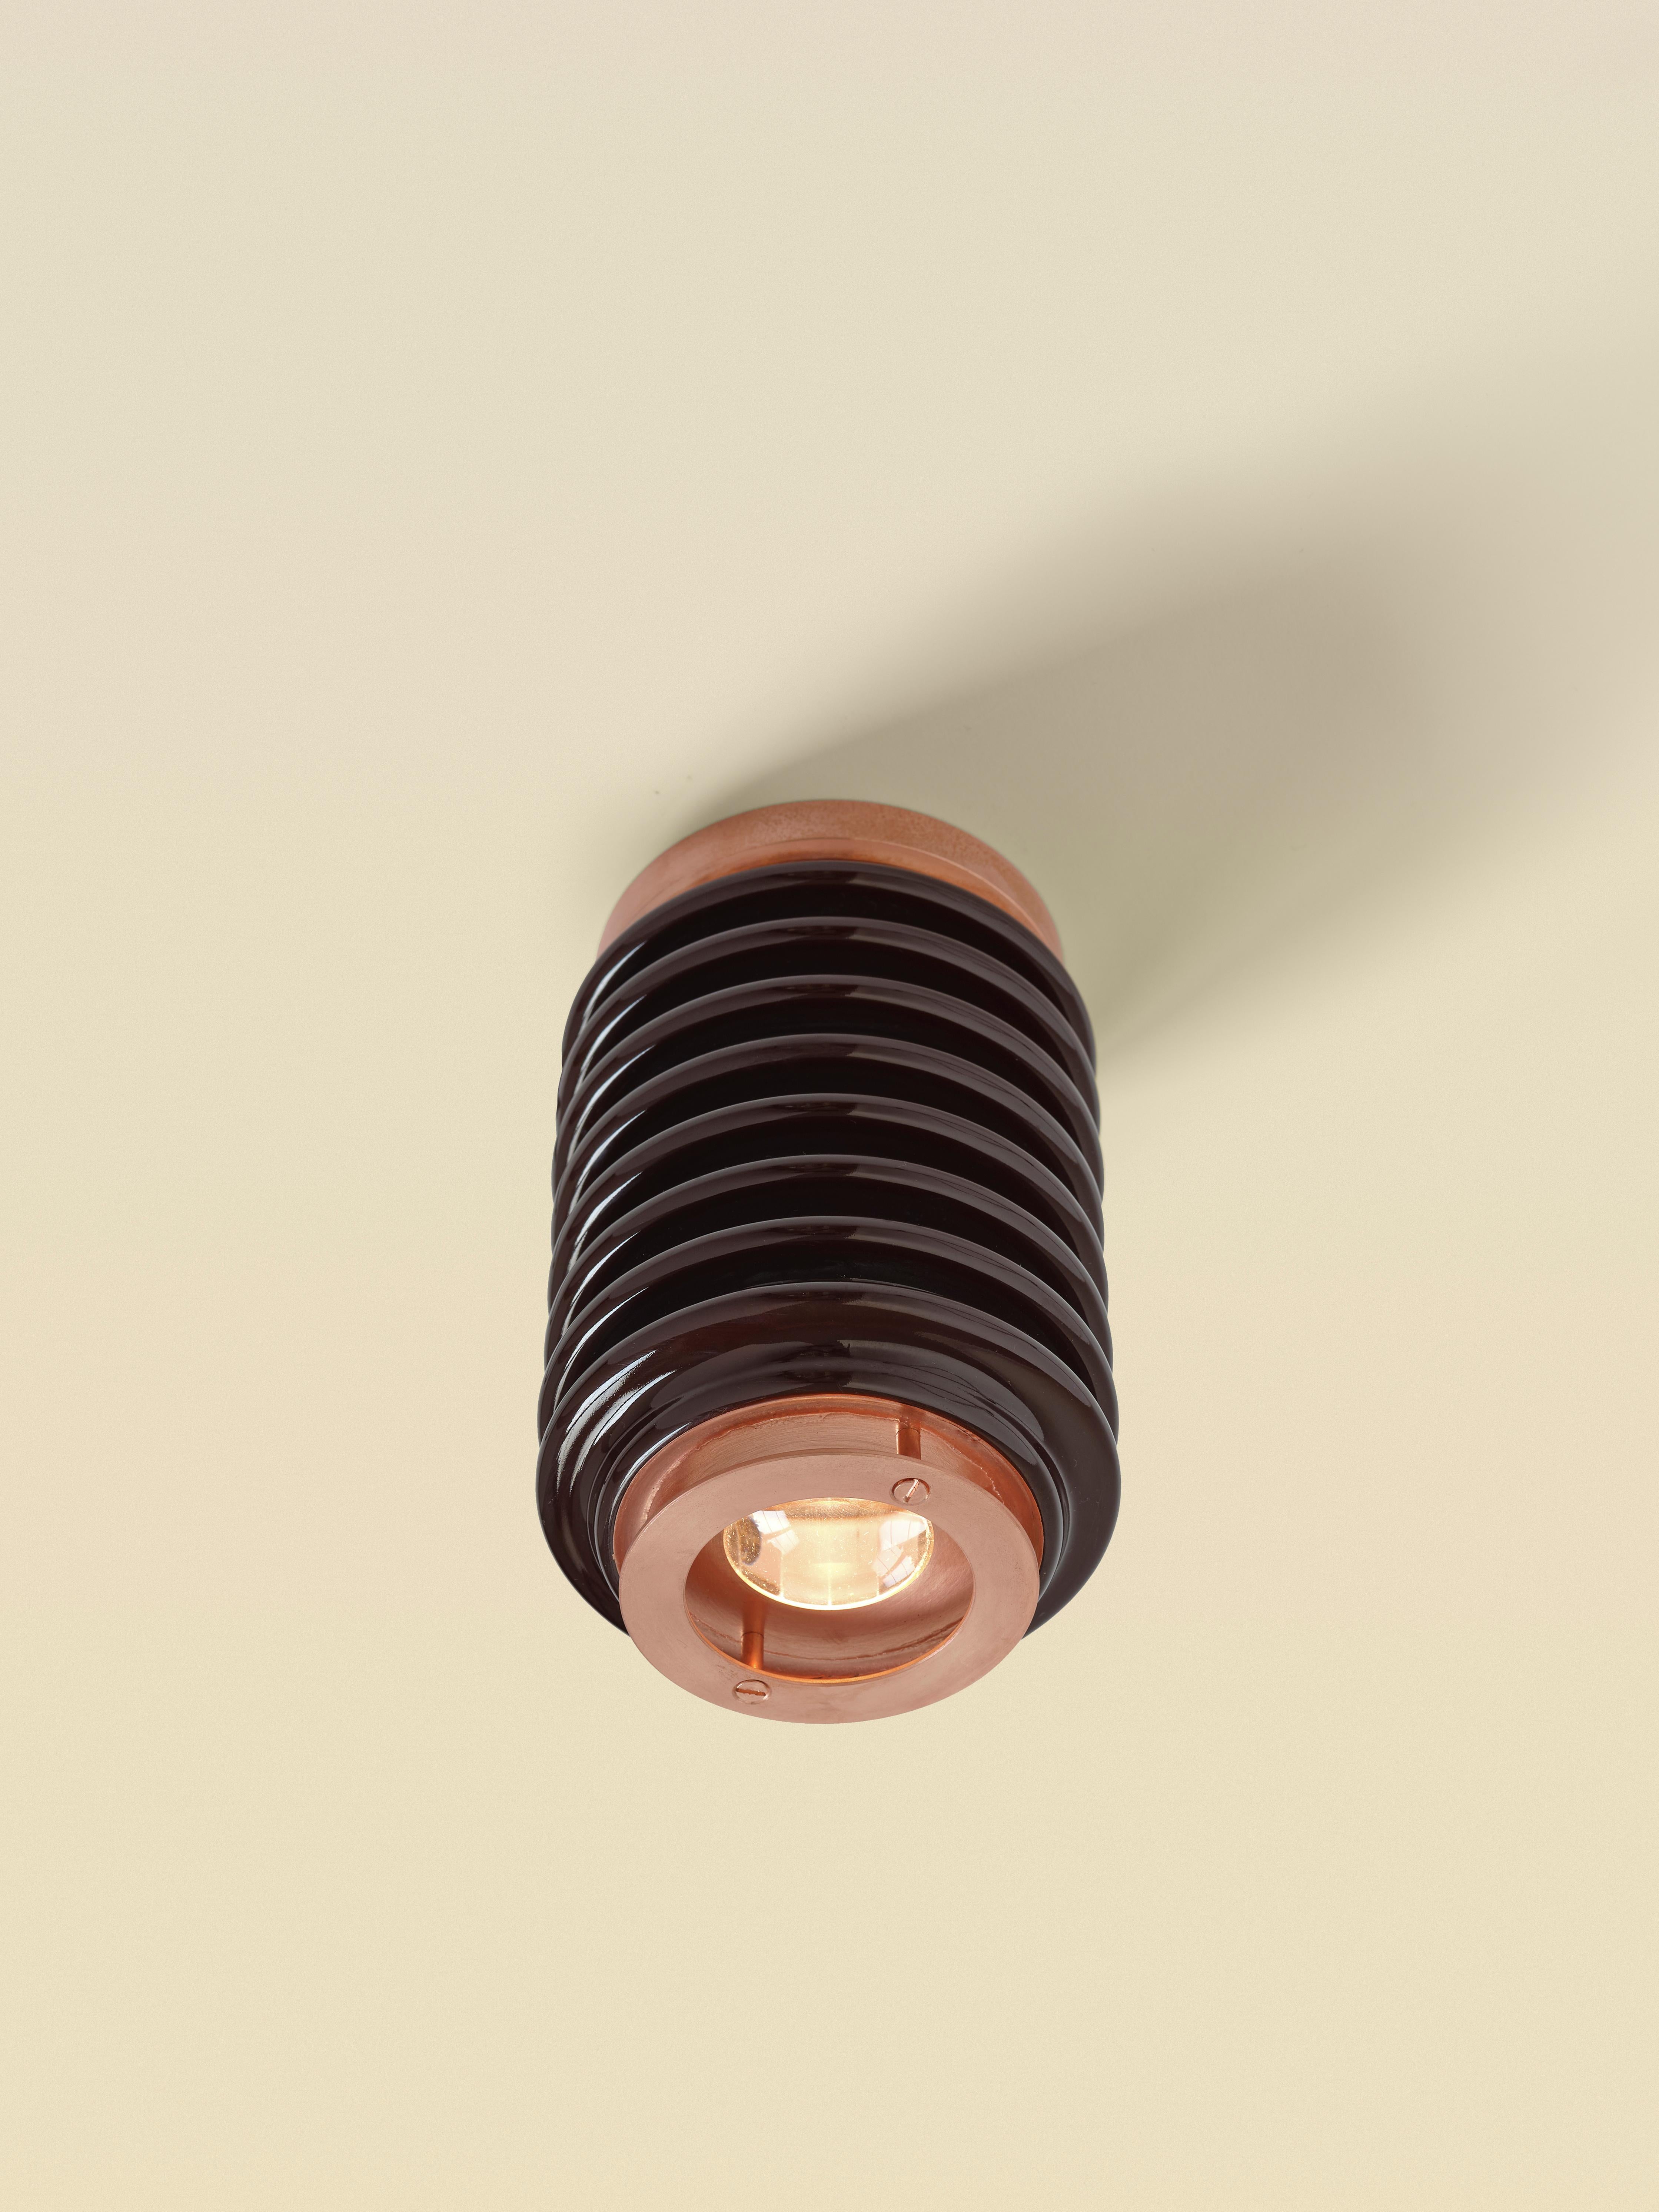 Ceramic C1 Light, 2022

Rooted in the intersection of man and nature, this uncanny collection employs recyclable, metalized ceramic insulator modules — conventionally used in electrical grids and poles — to form ambient spotlights via a patented